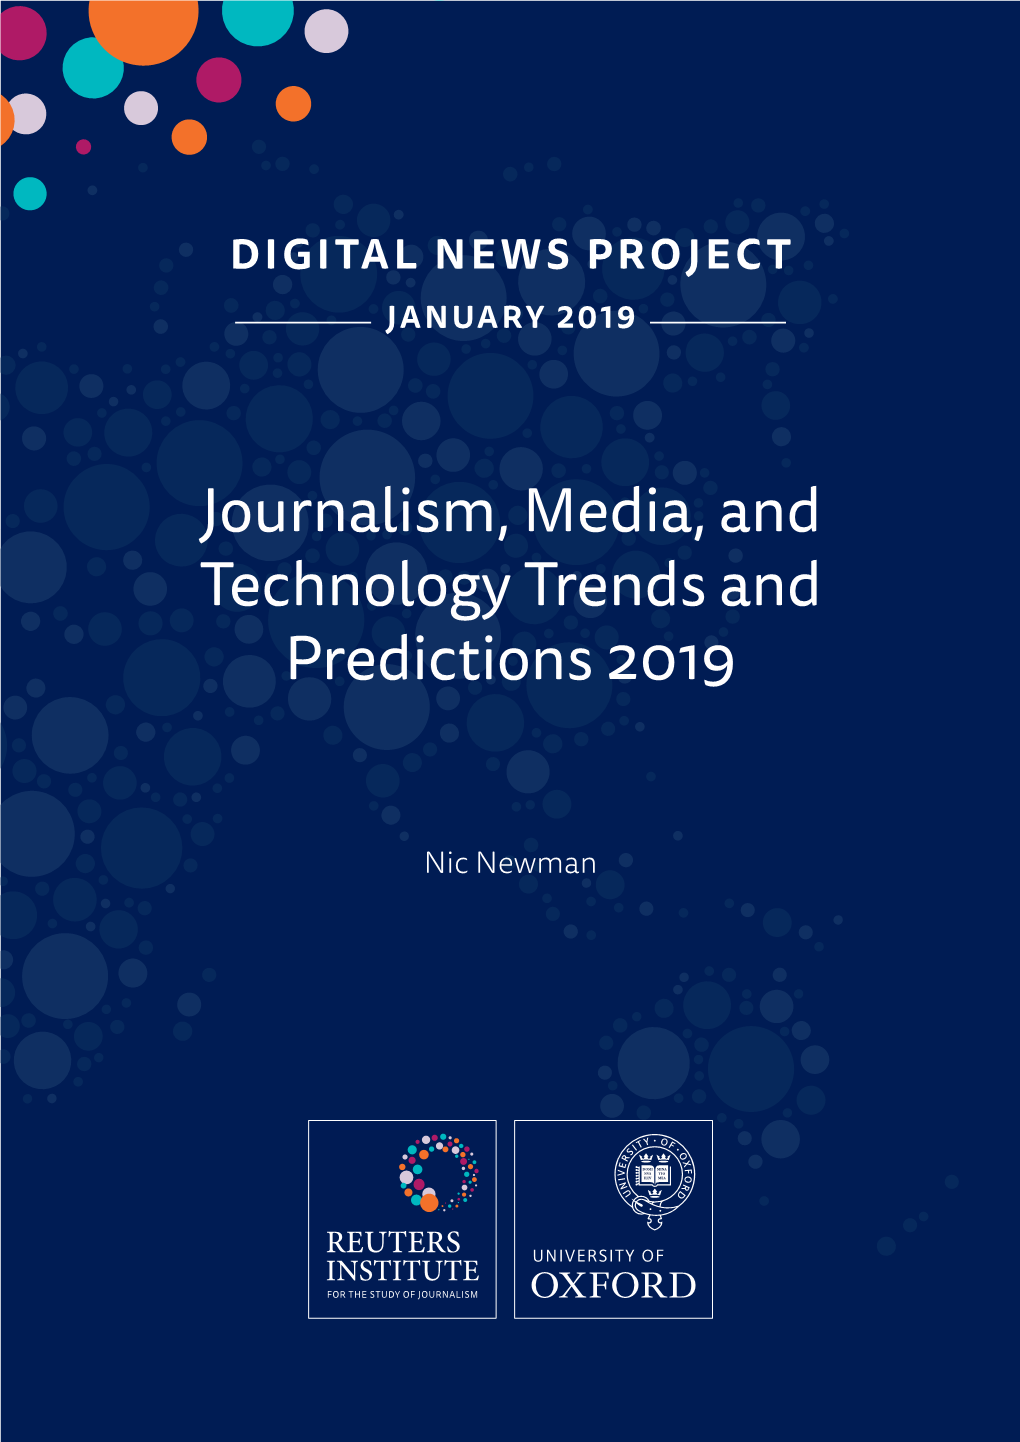 Journalism, Media, and Technology Trends and Predictions 2019